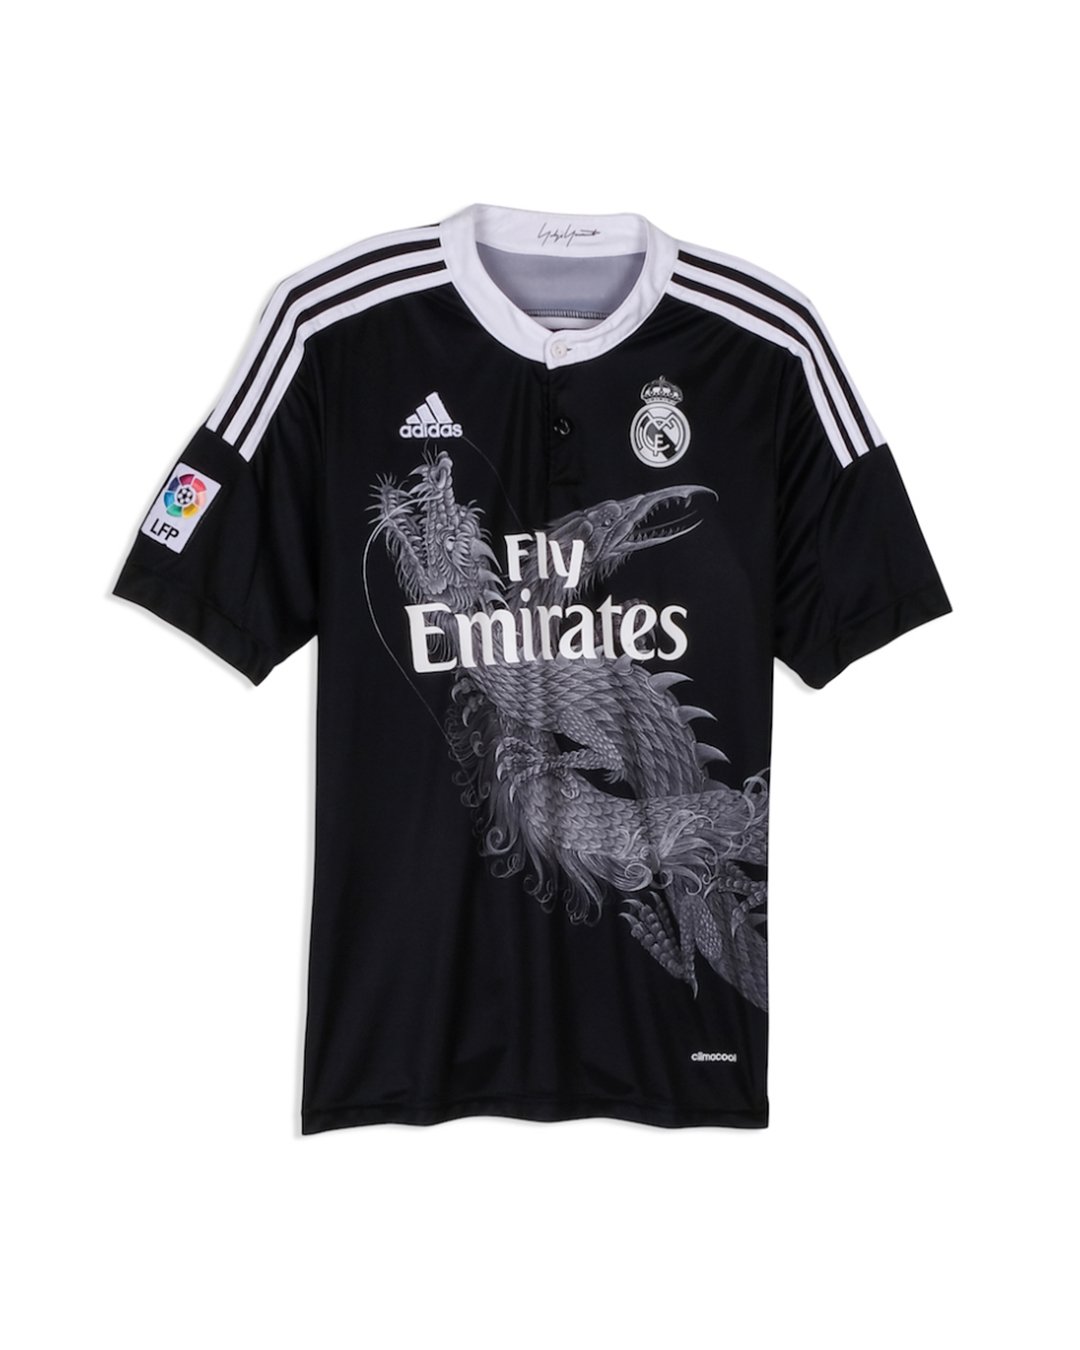 GRAILED on X: "Yohji Yamamoto x Adidas, 2014 - Featuring a mandarin collar  and hand-illustrated by Yamamoto himself, this third kit for Real Madrid  might be the most fire soccer jersey of